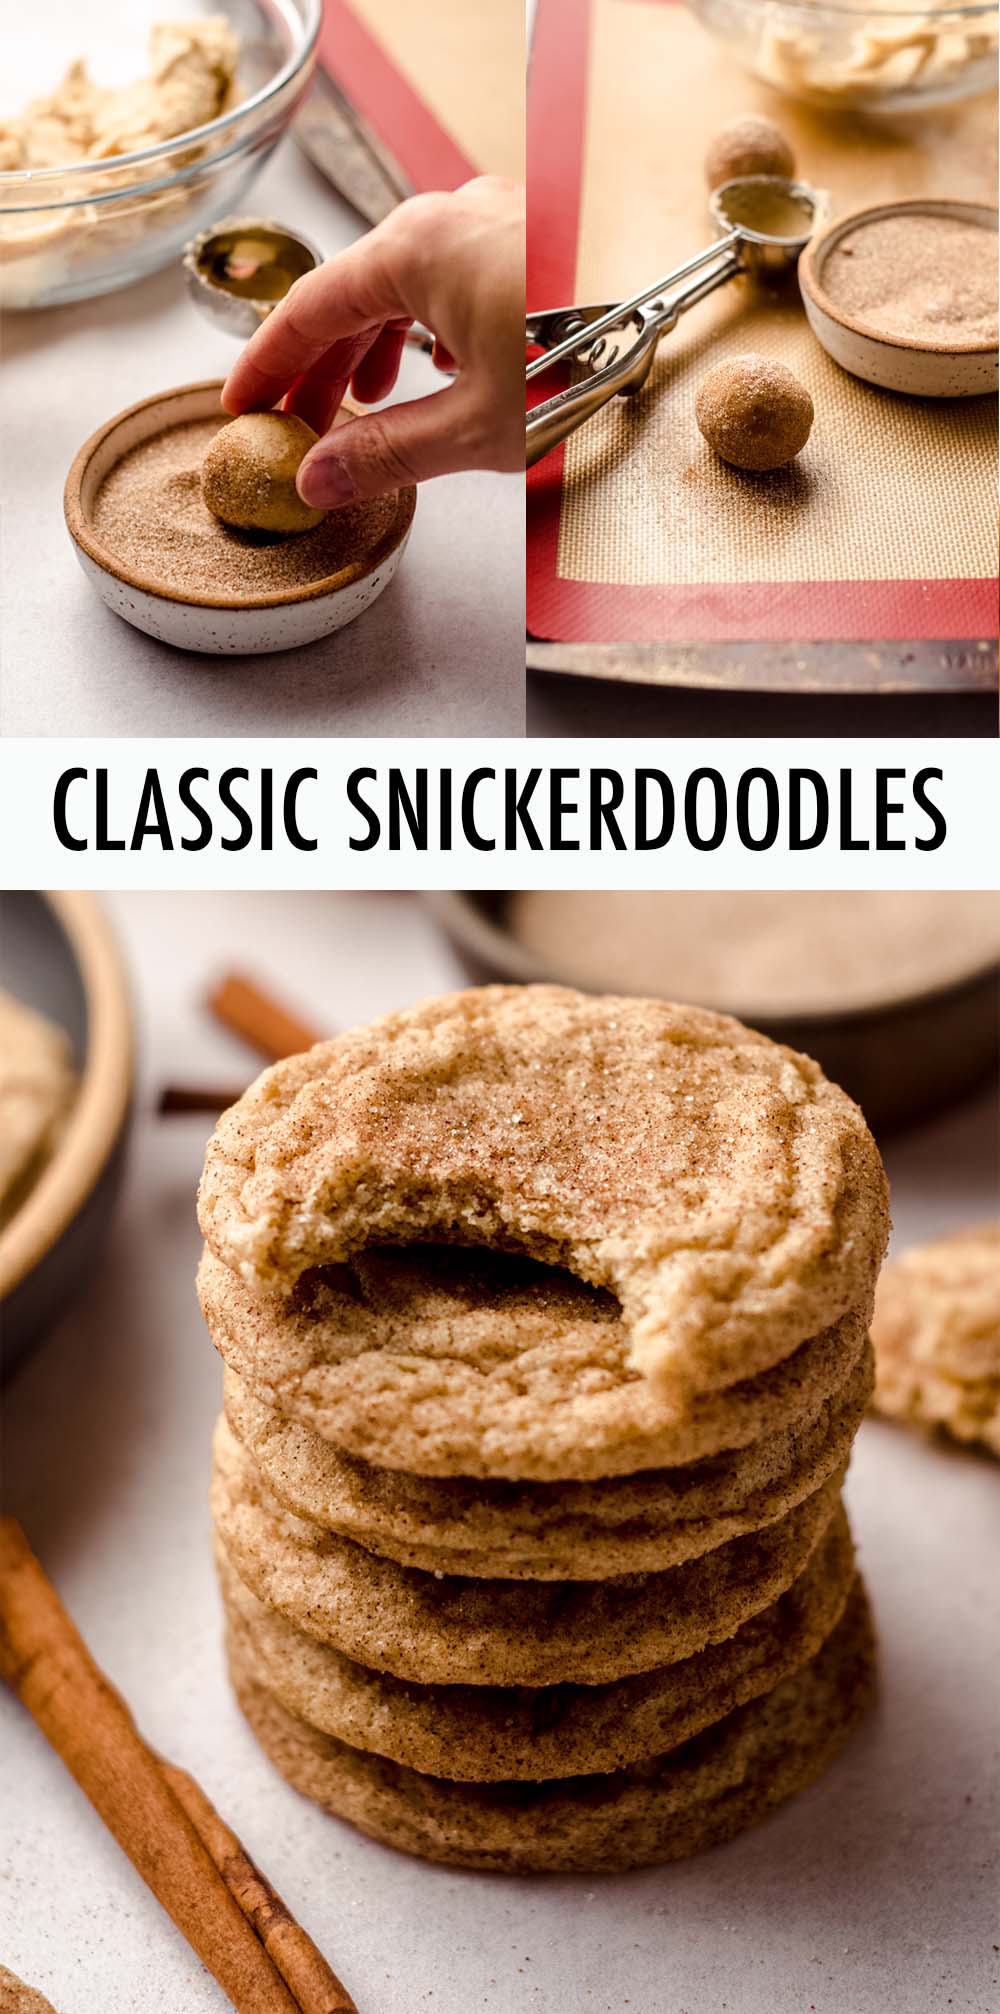 Crisp edges, melt-in-your-mouth centers, and all the cinnamon-sugar you could want from these classic snickerdoodle cookies. via @frshaprilflours